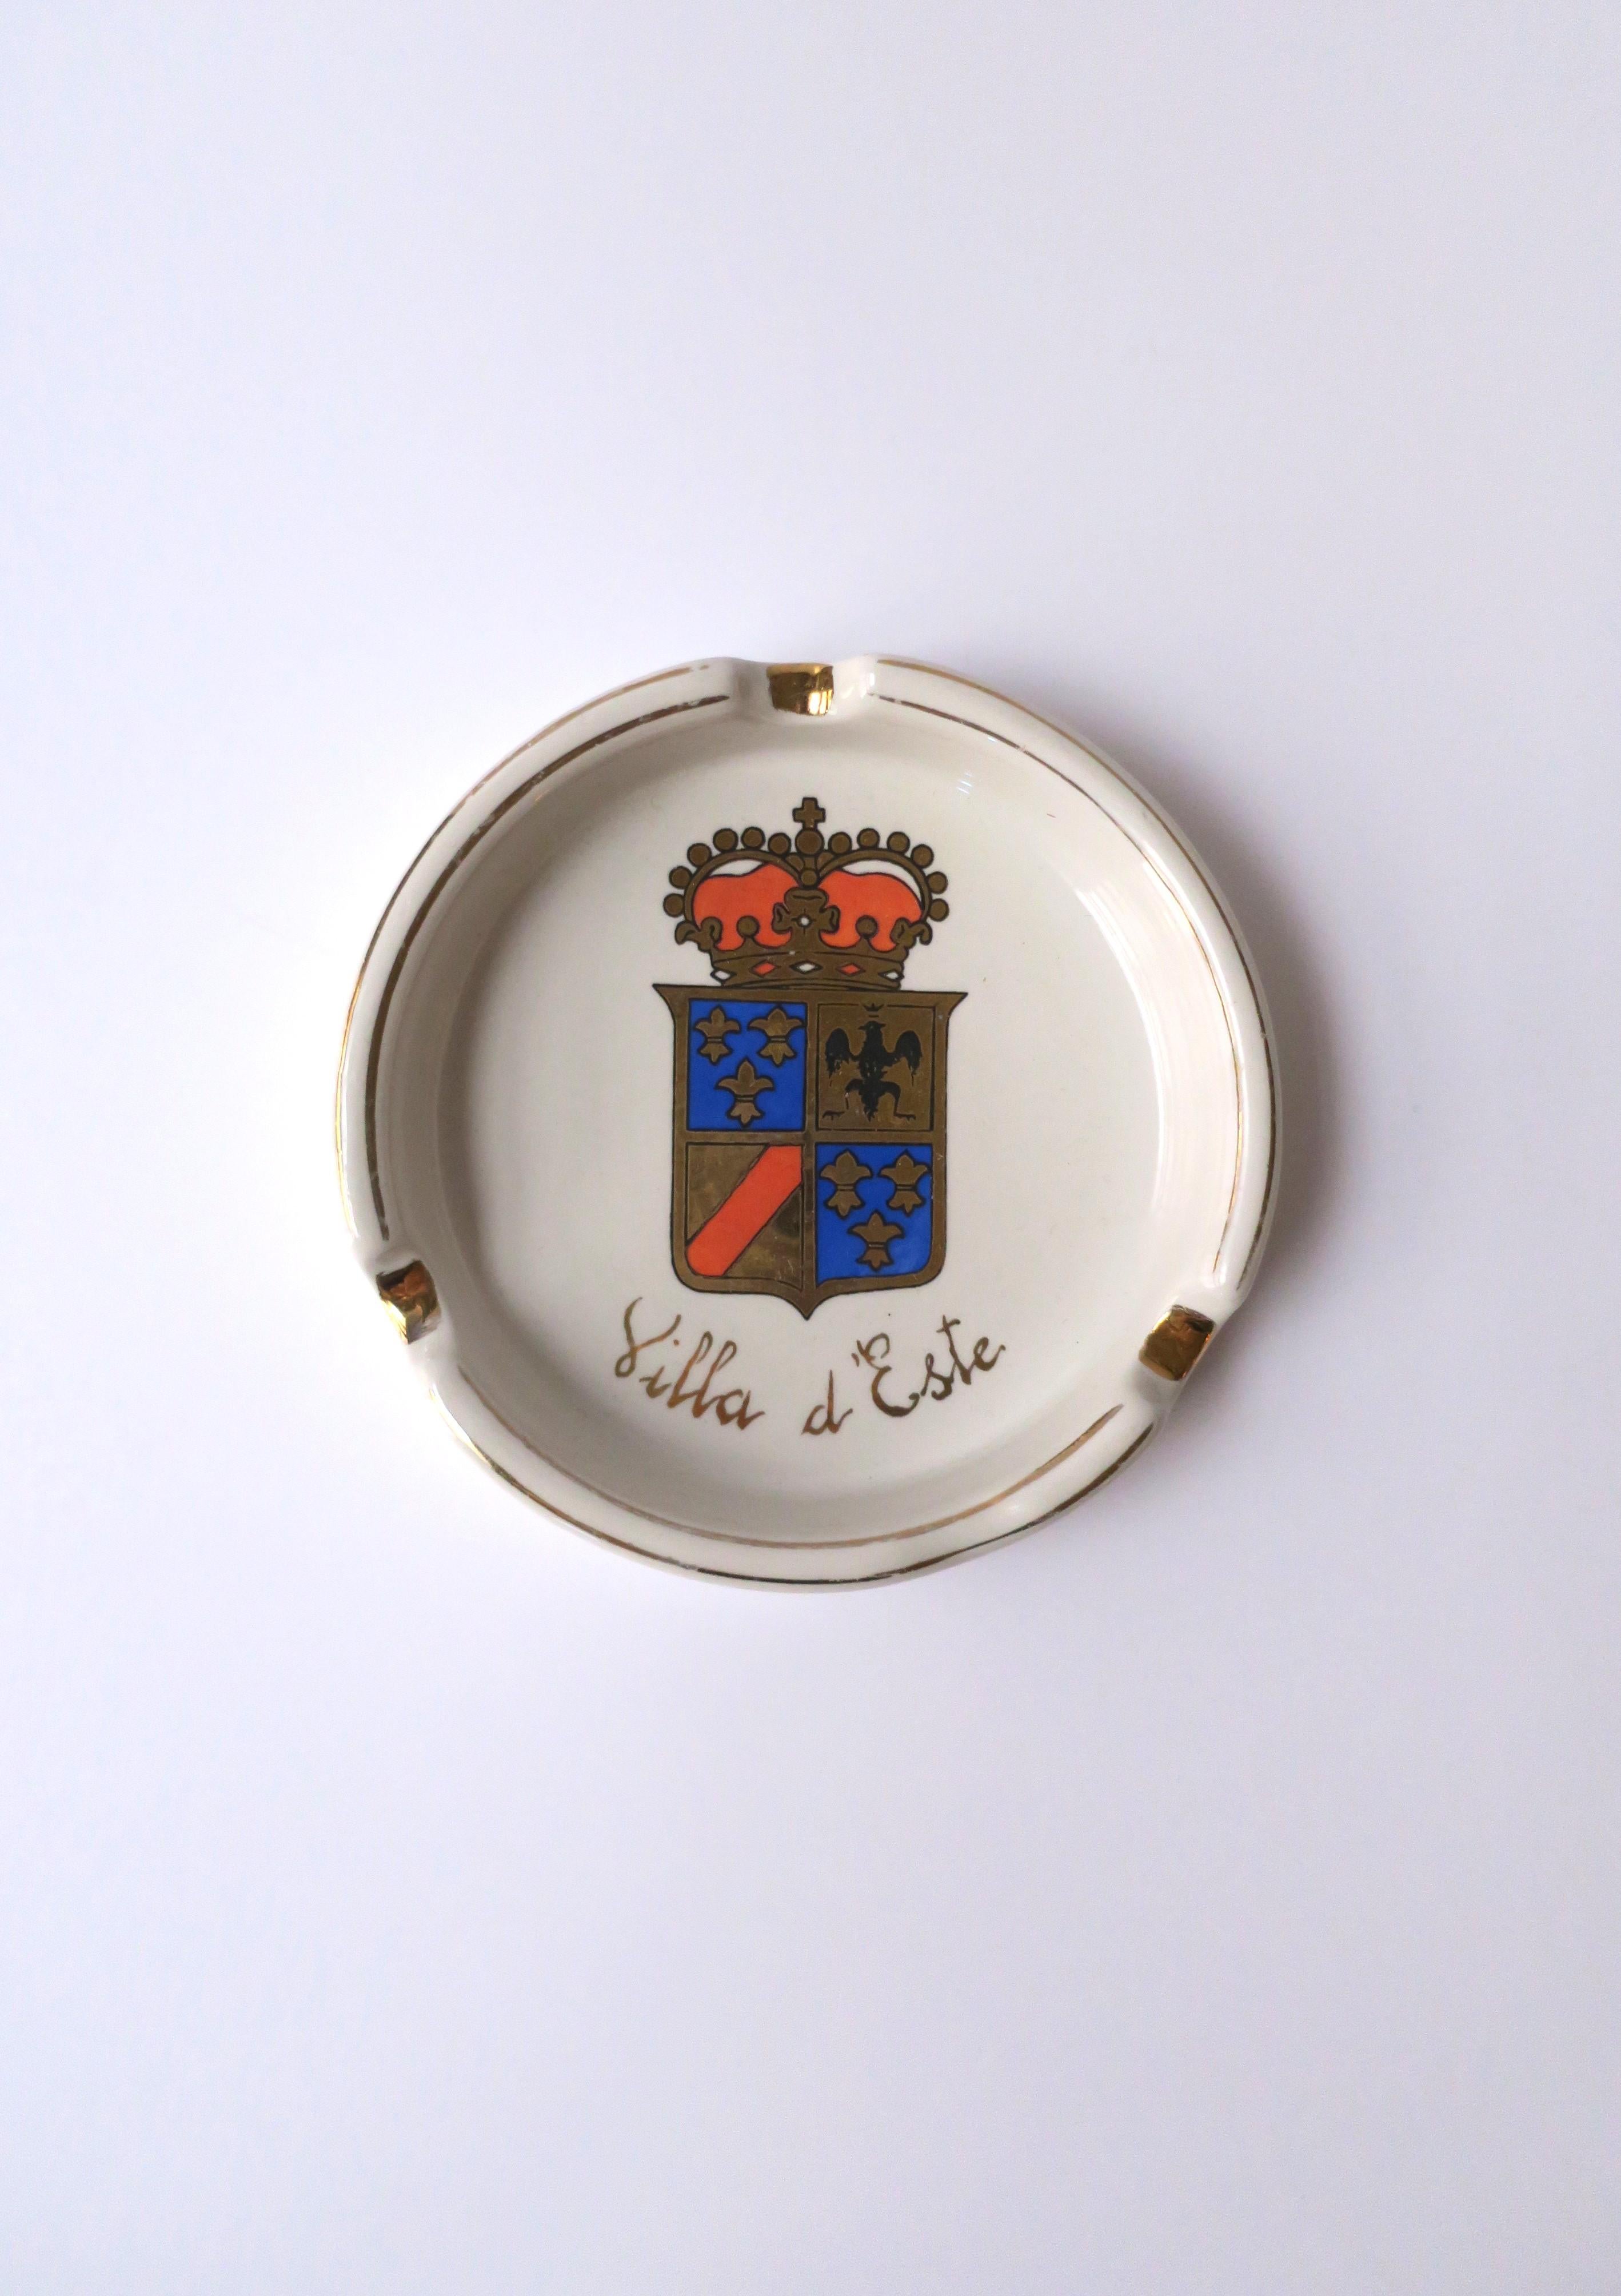 A white ceramic ashtray or catchall vide-poche from the iconic Villa d'Este Hotel, Italy, circa mid-20th century, Italy. Piece is from the iconic Villa d'Este Hotel, Lake Como, northern Italy. Hotels' crest at center in black, gold, royal blue and